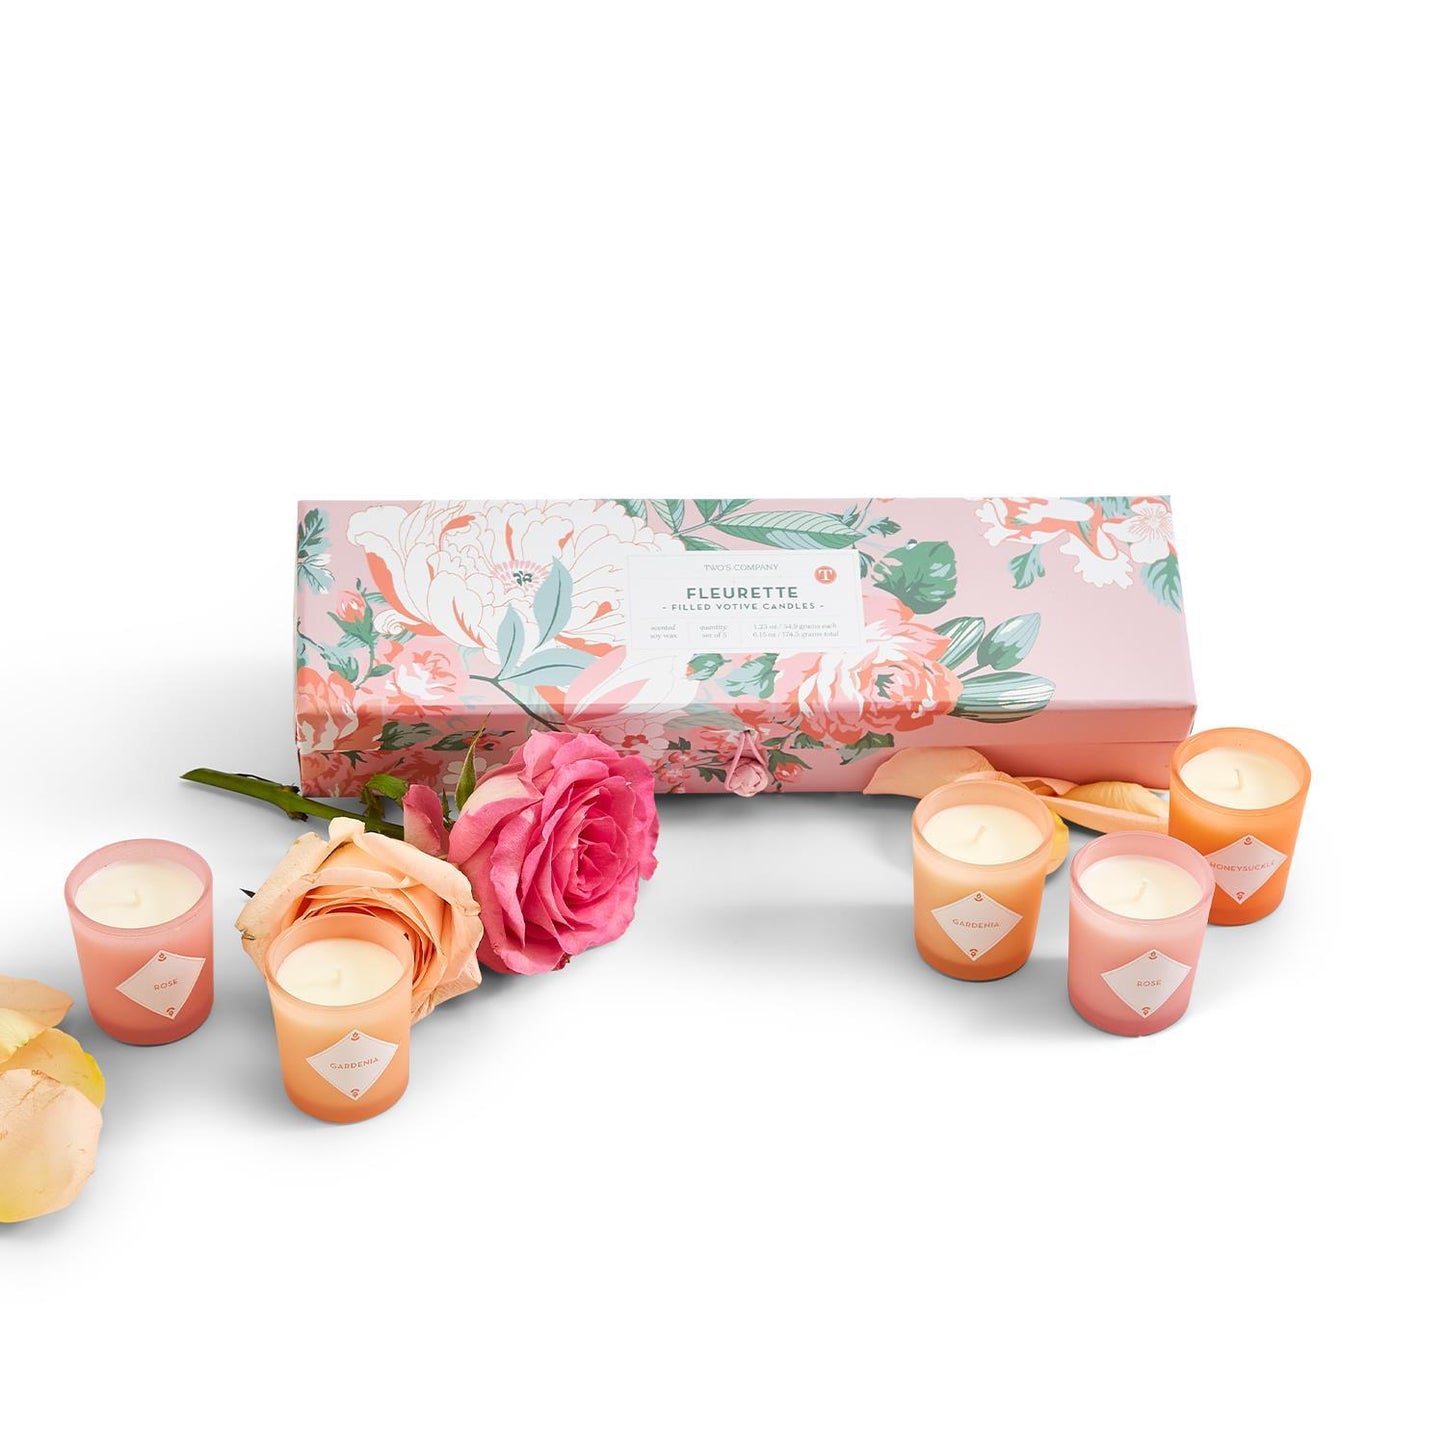 Fleurette Scented Candles in Gift Box